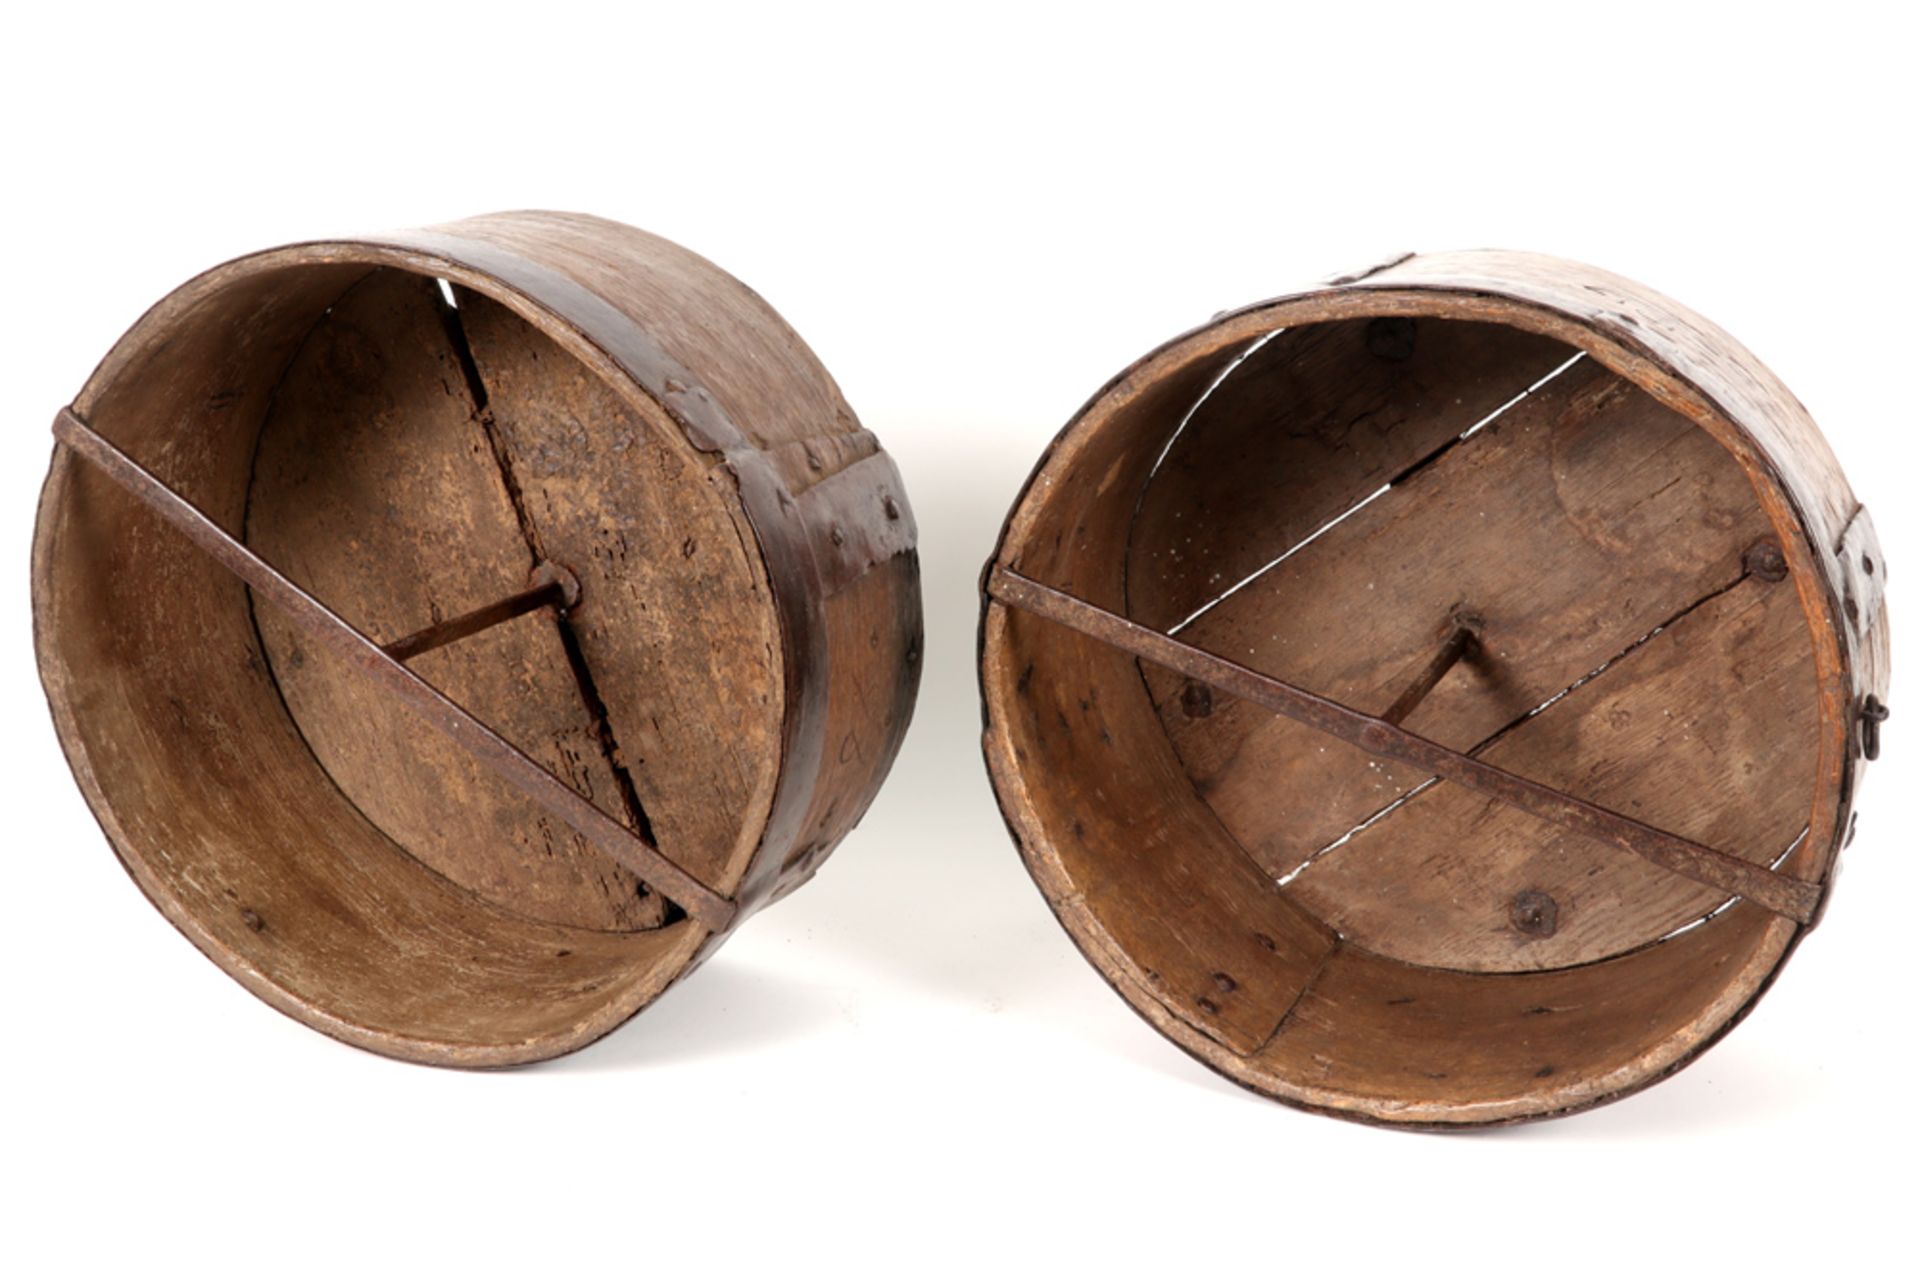 two antique grain measuring bowls in wood and wrought iron, one marked CRSM and dated 1816/17 and - Image 2 of 5